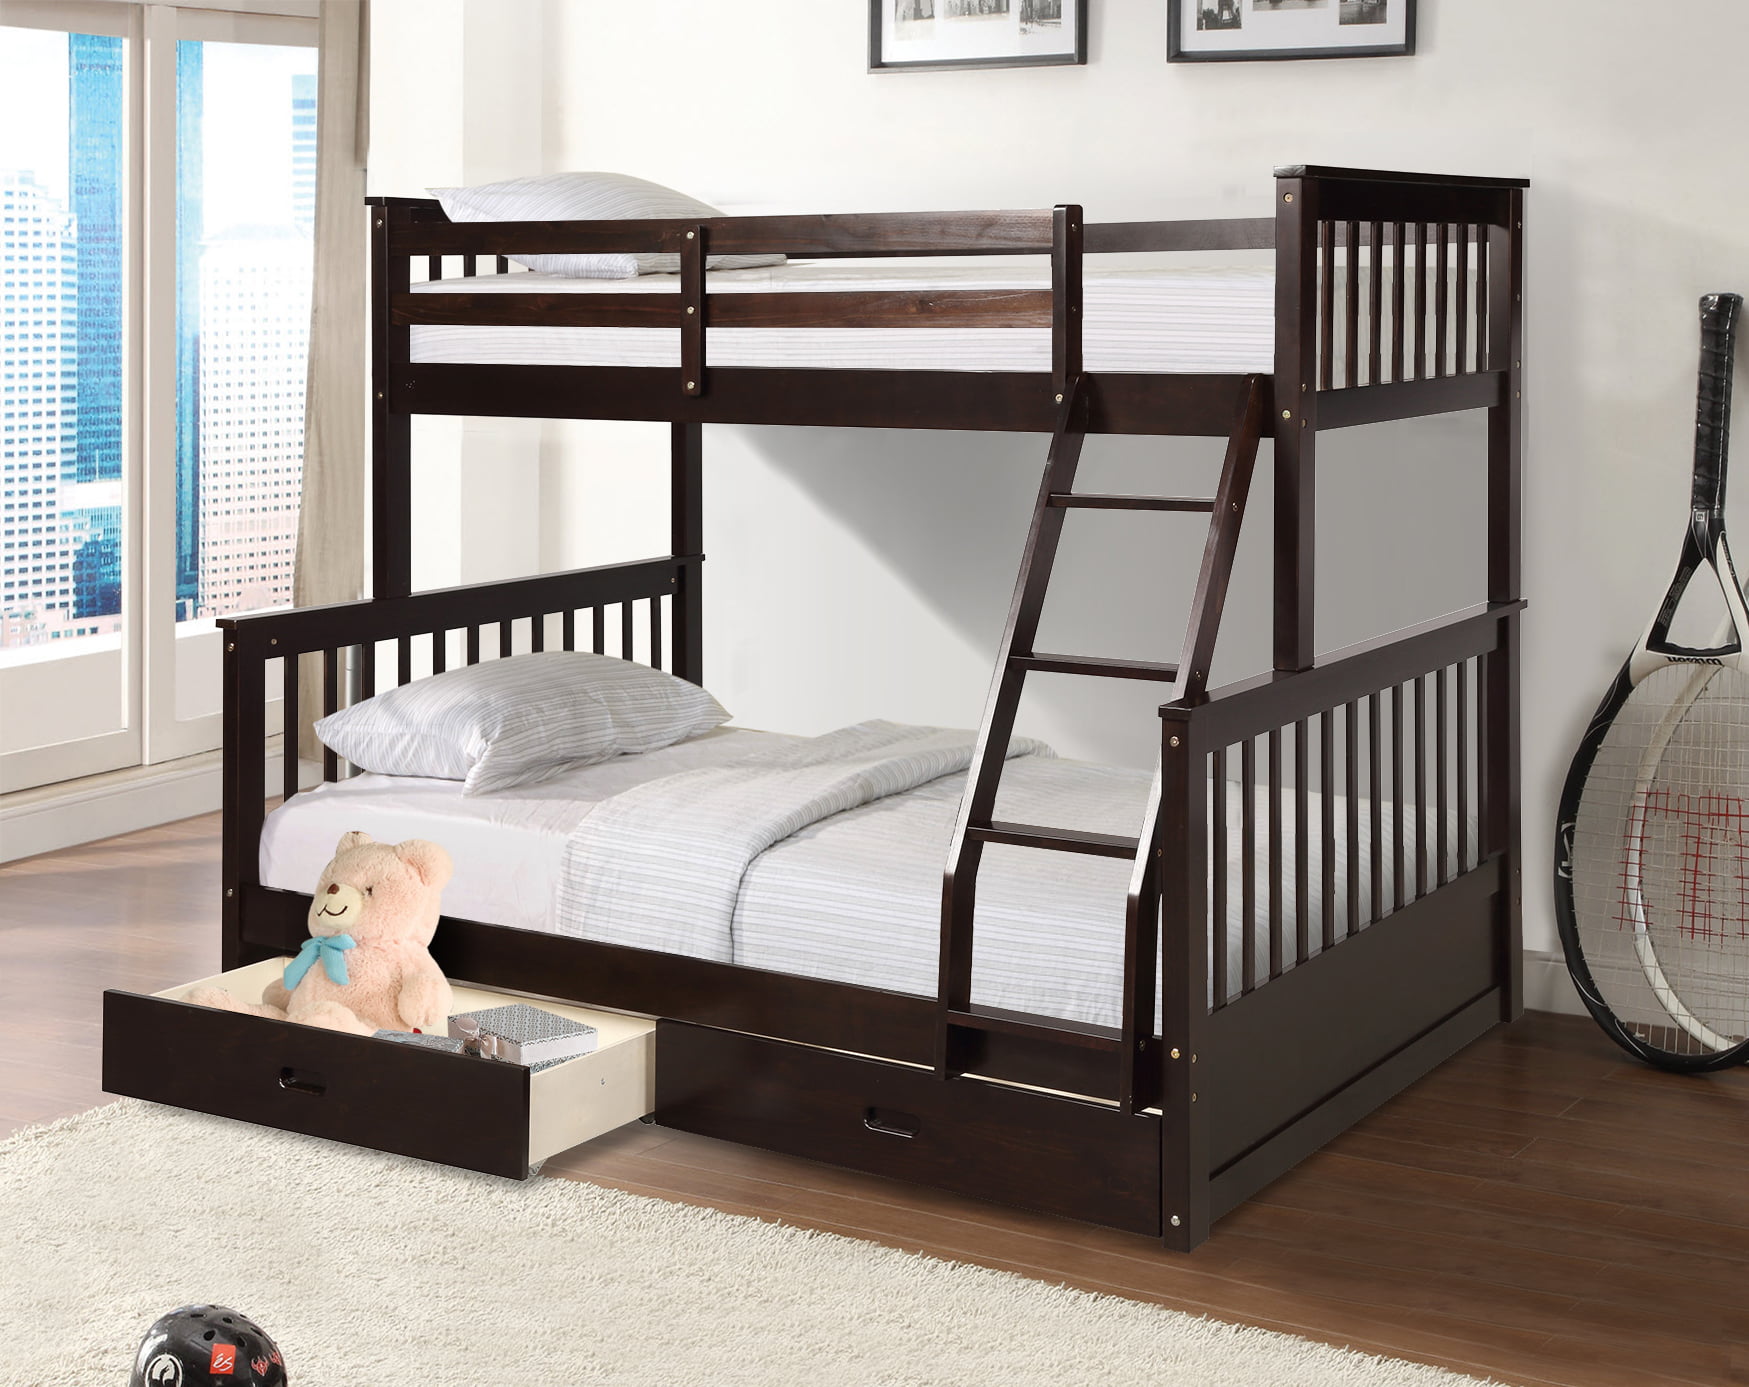 Full Bunk Beds Bed Organizer, Bunk Beds For Kids Girls